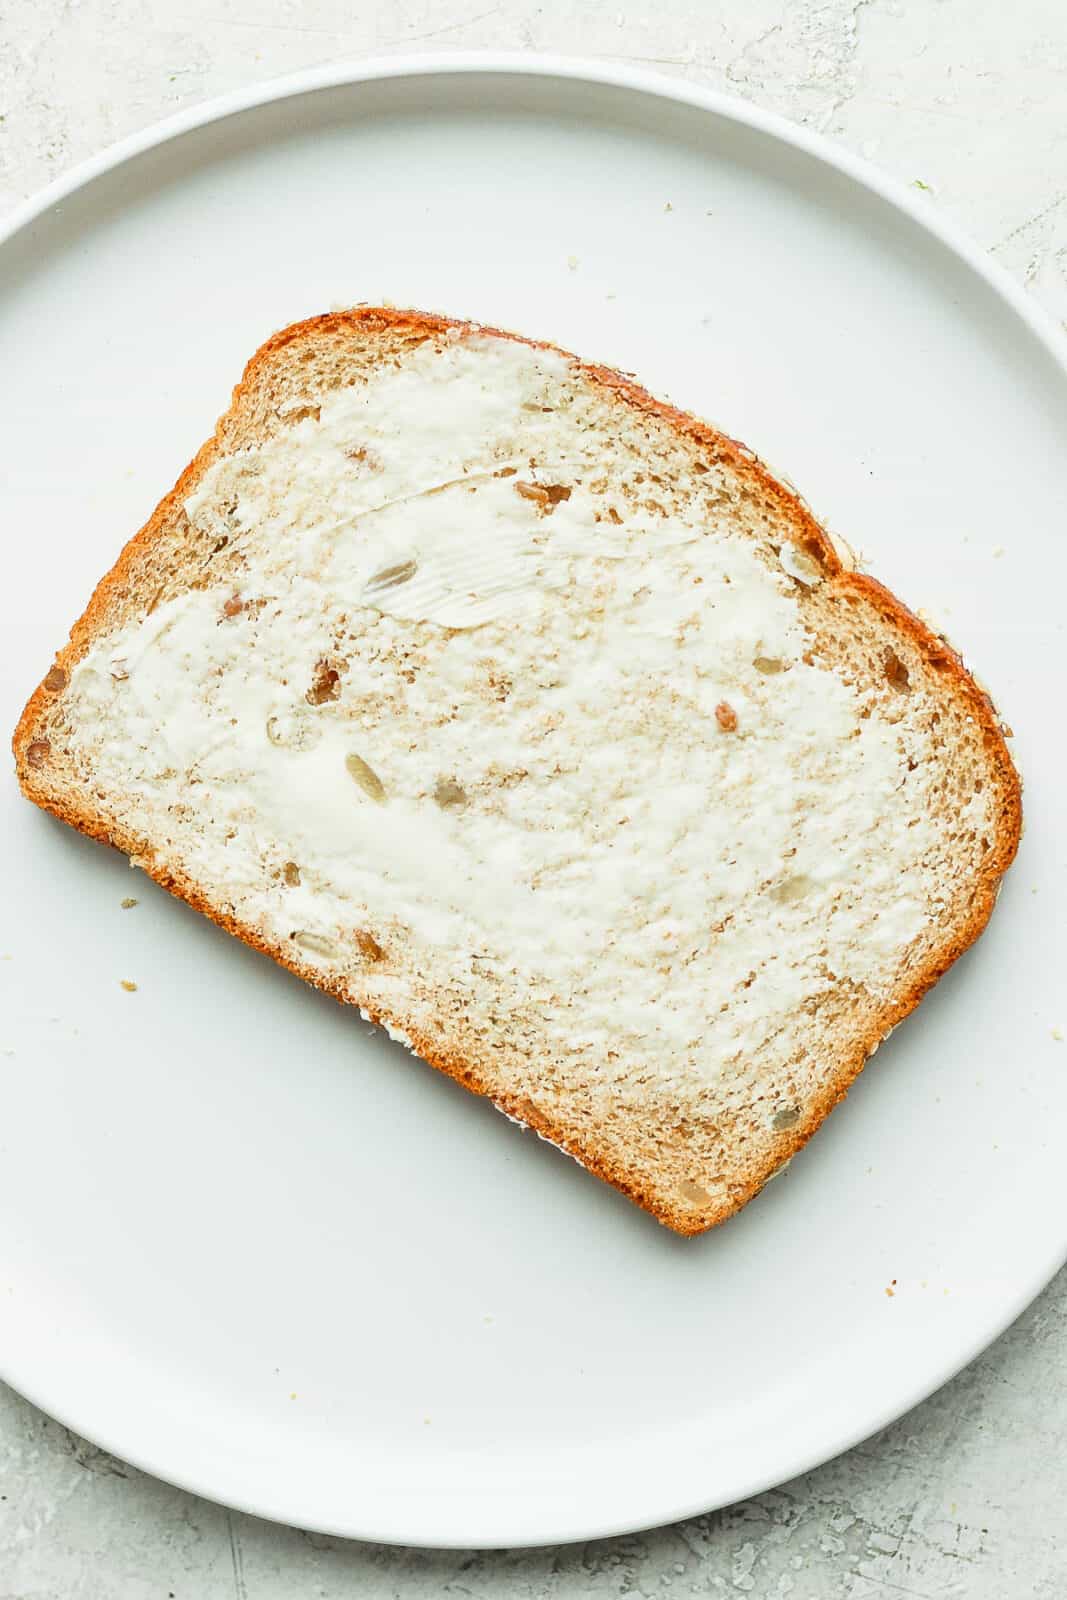 A slice of bread on a plate with butter spread on it.